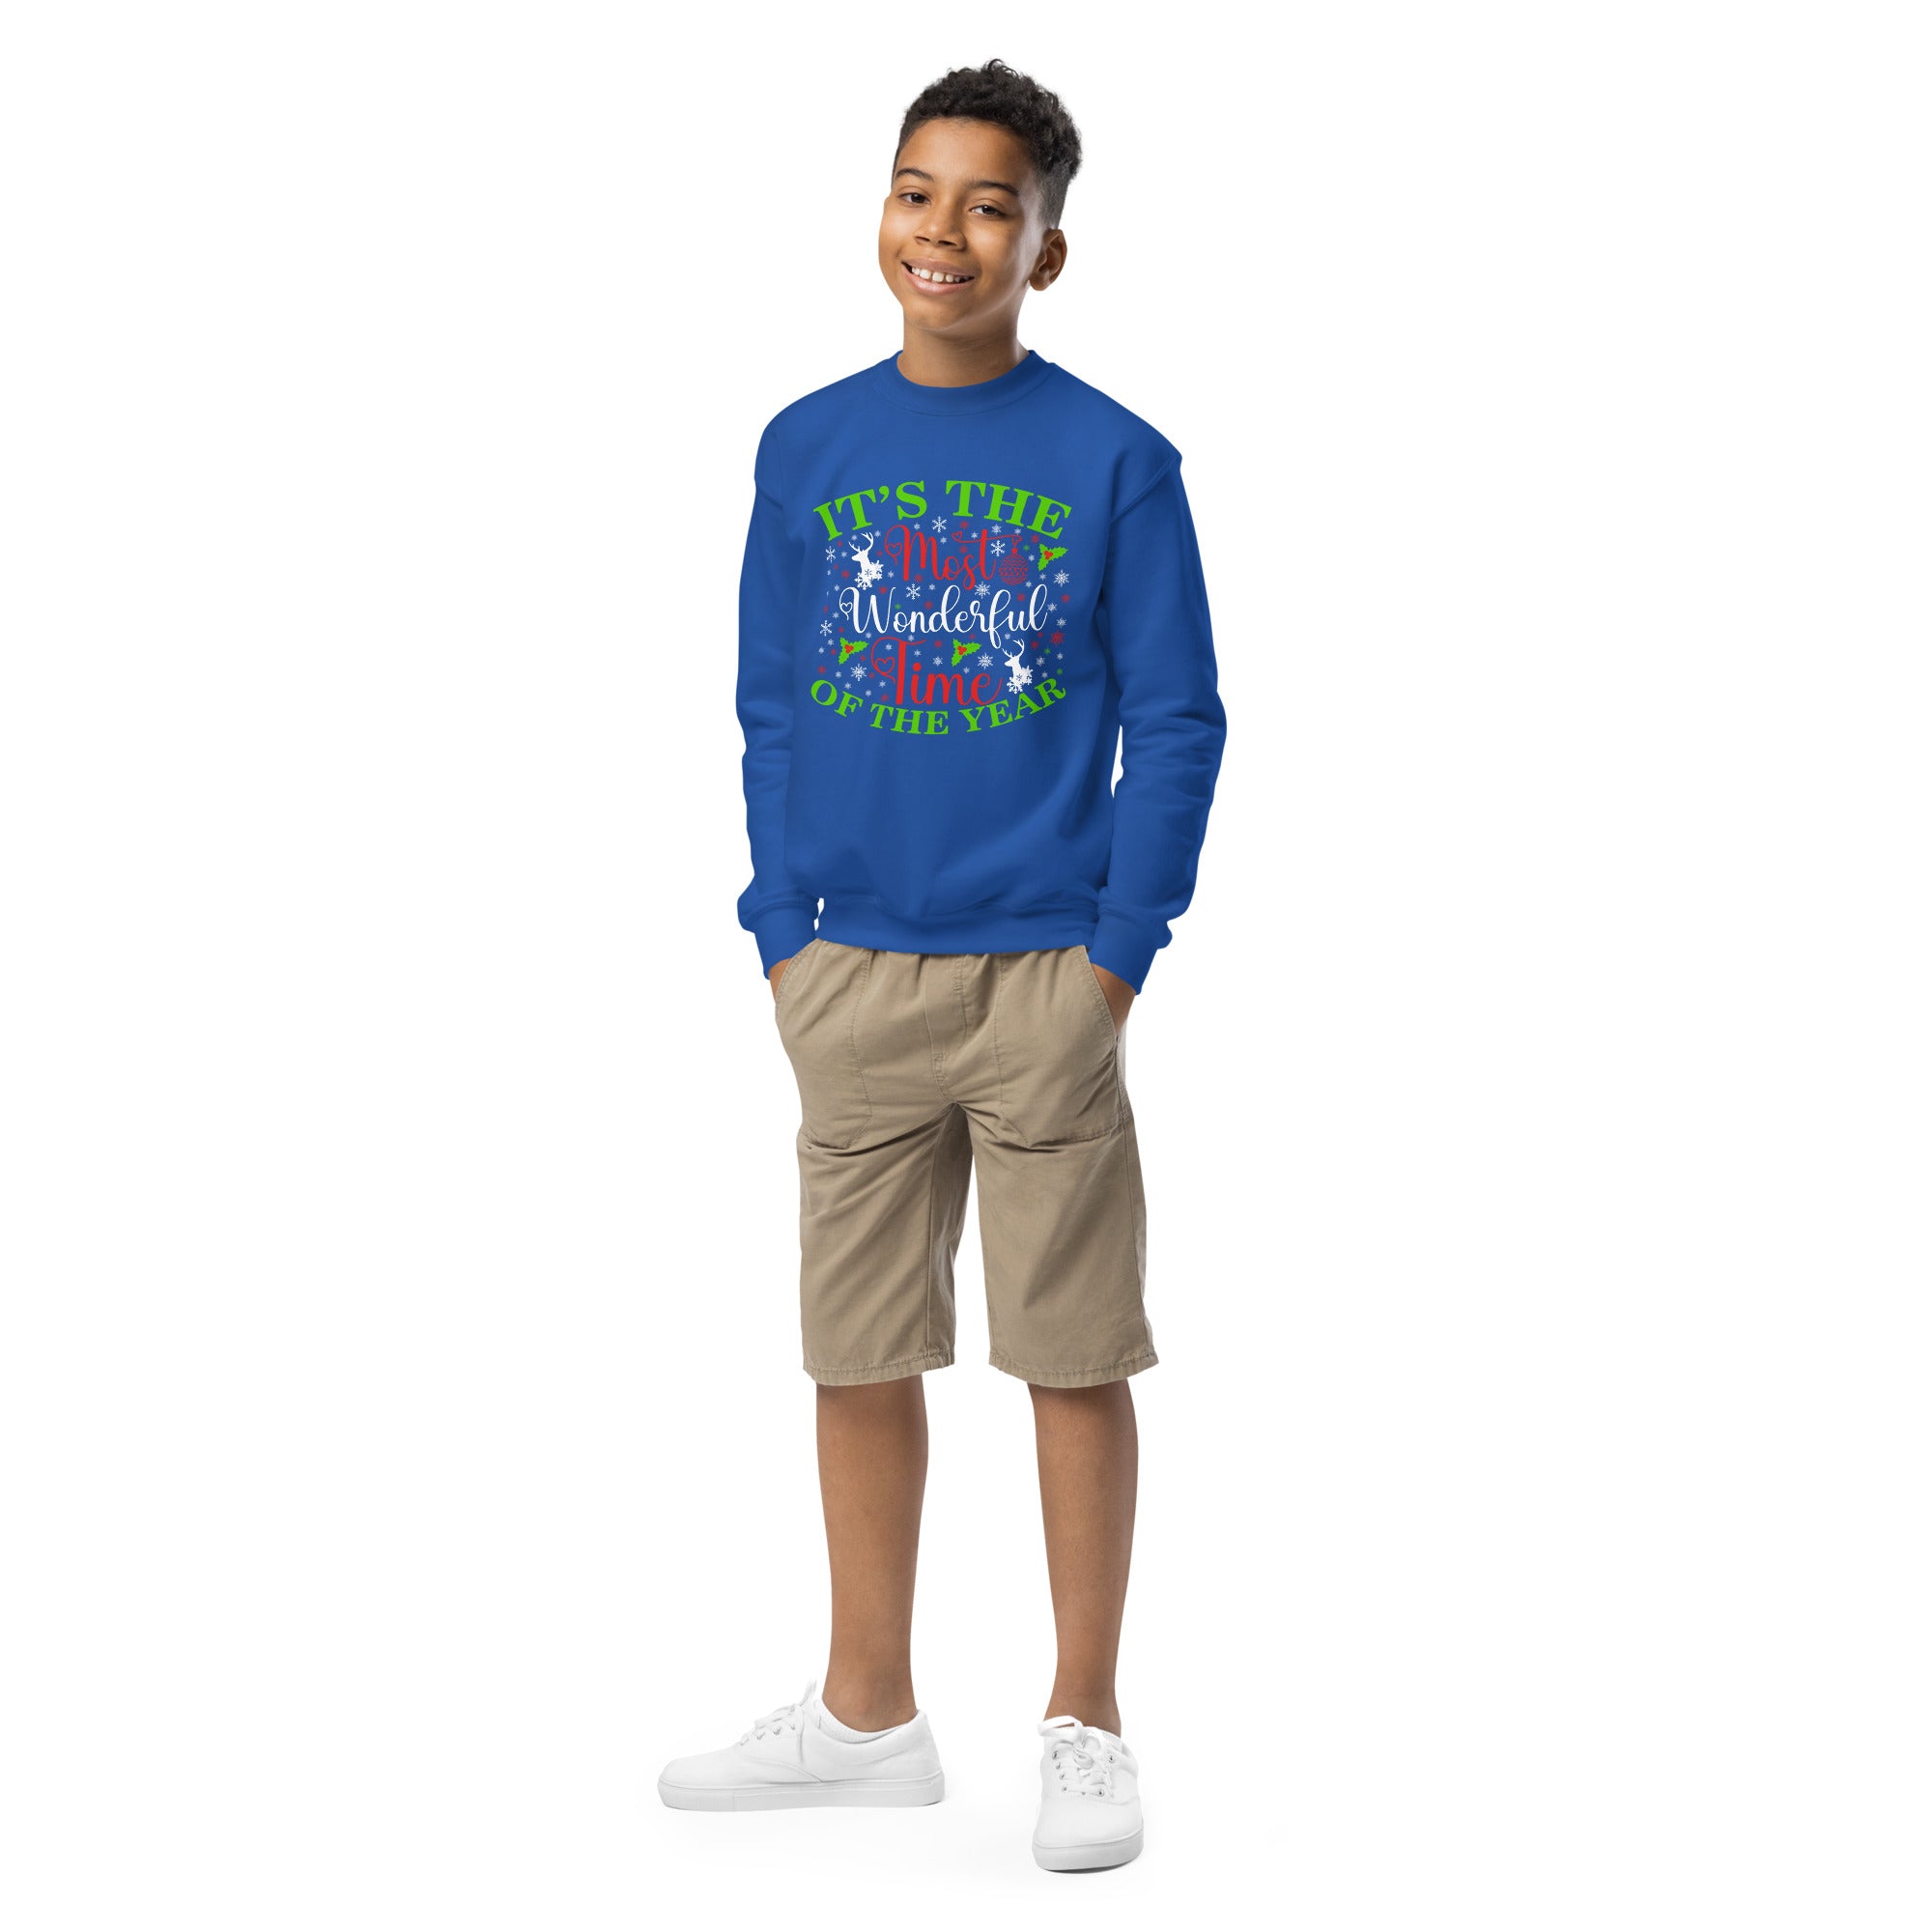 It's The Most Wonderful Time Of The Year Kids Sweatshirt Merry Christmas Kids Jumper